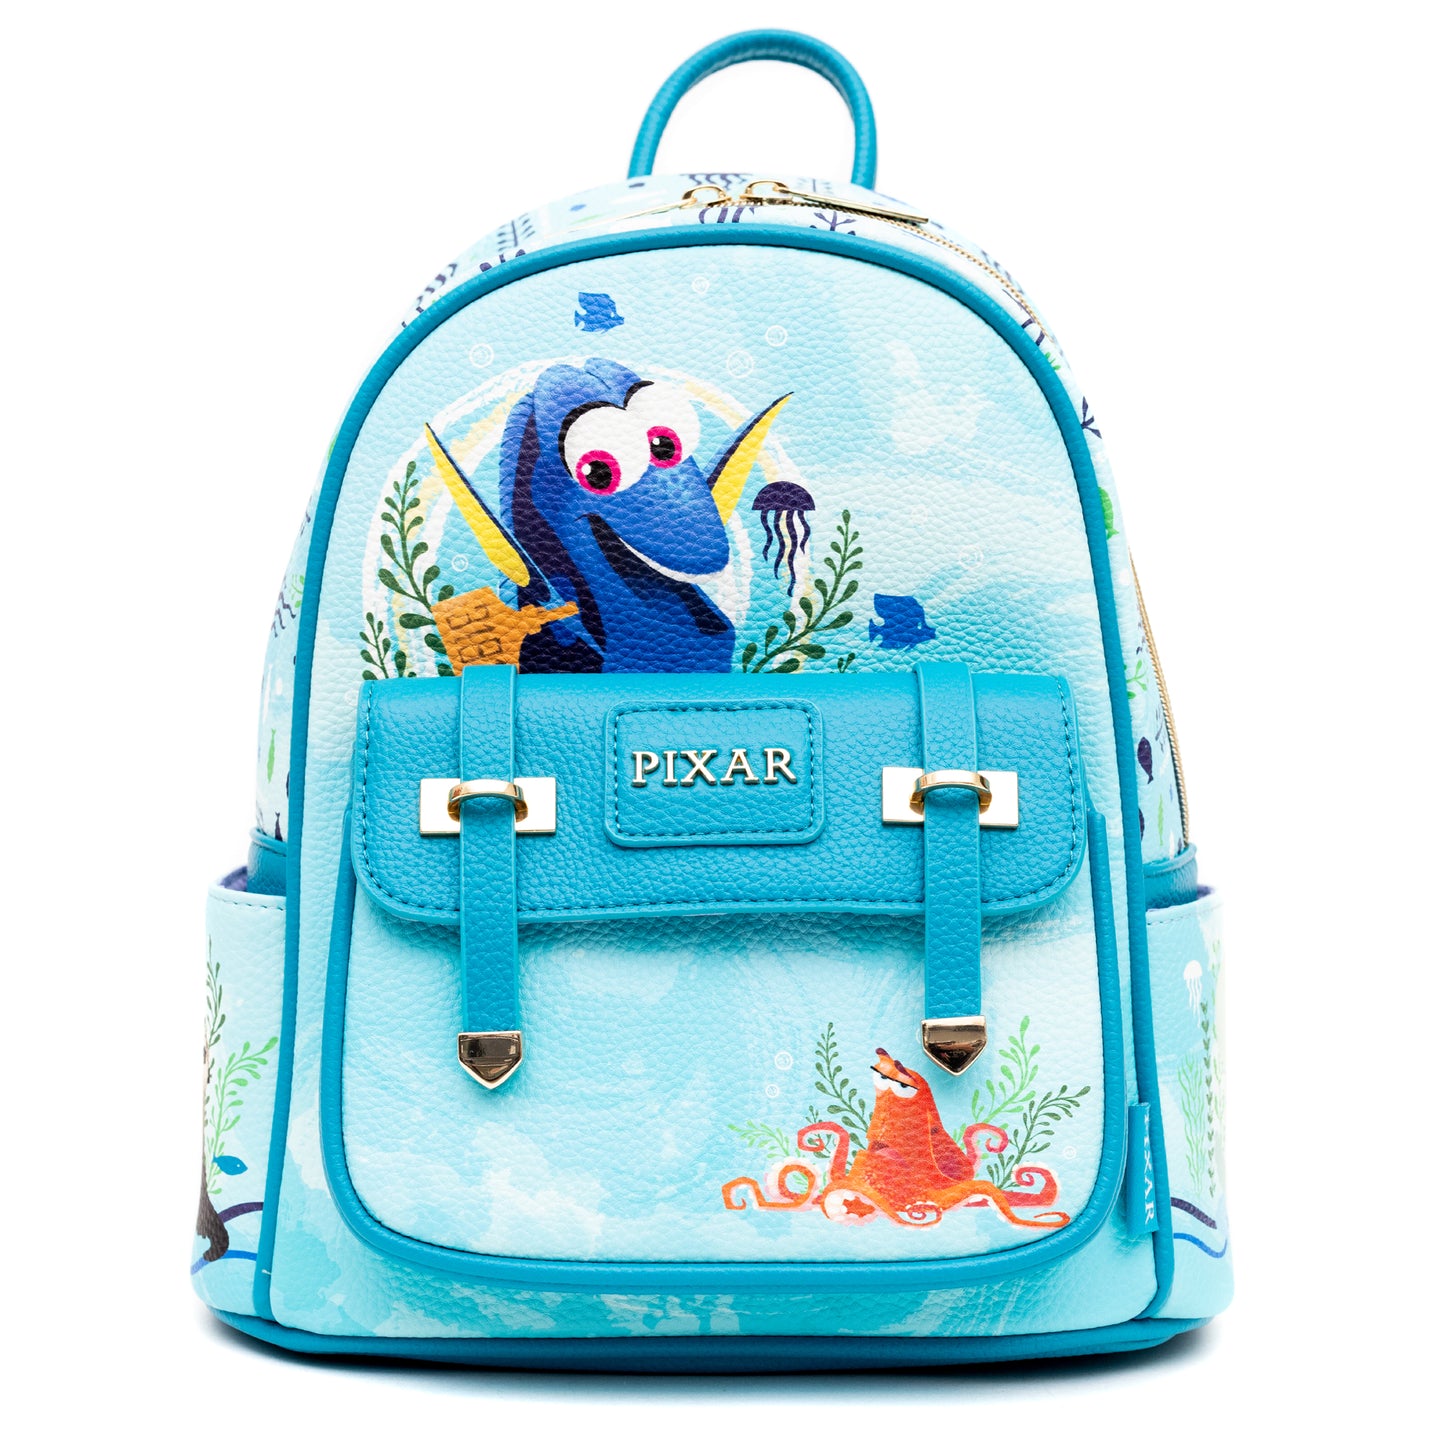 Disney Pixar Finding Dory Nemo Insulated Lunch Bag with shoulder